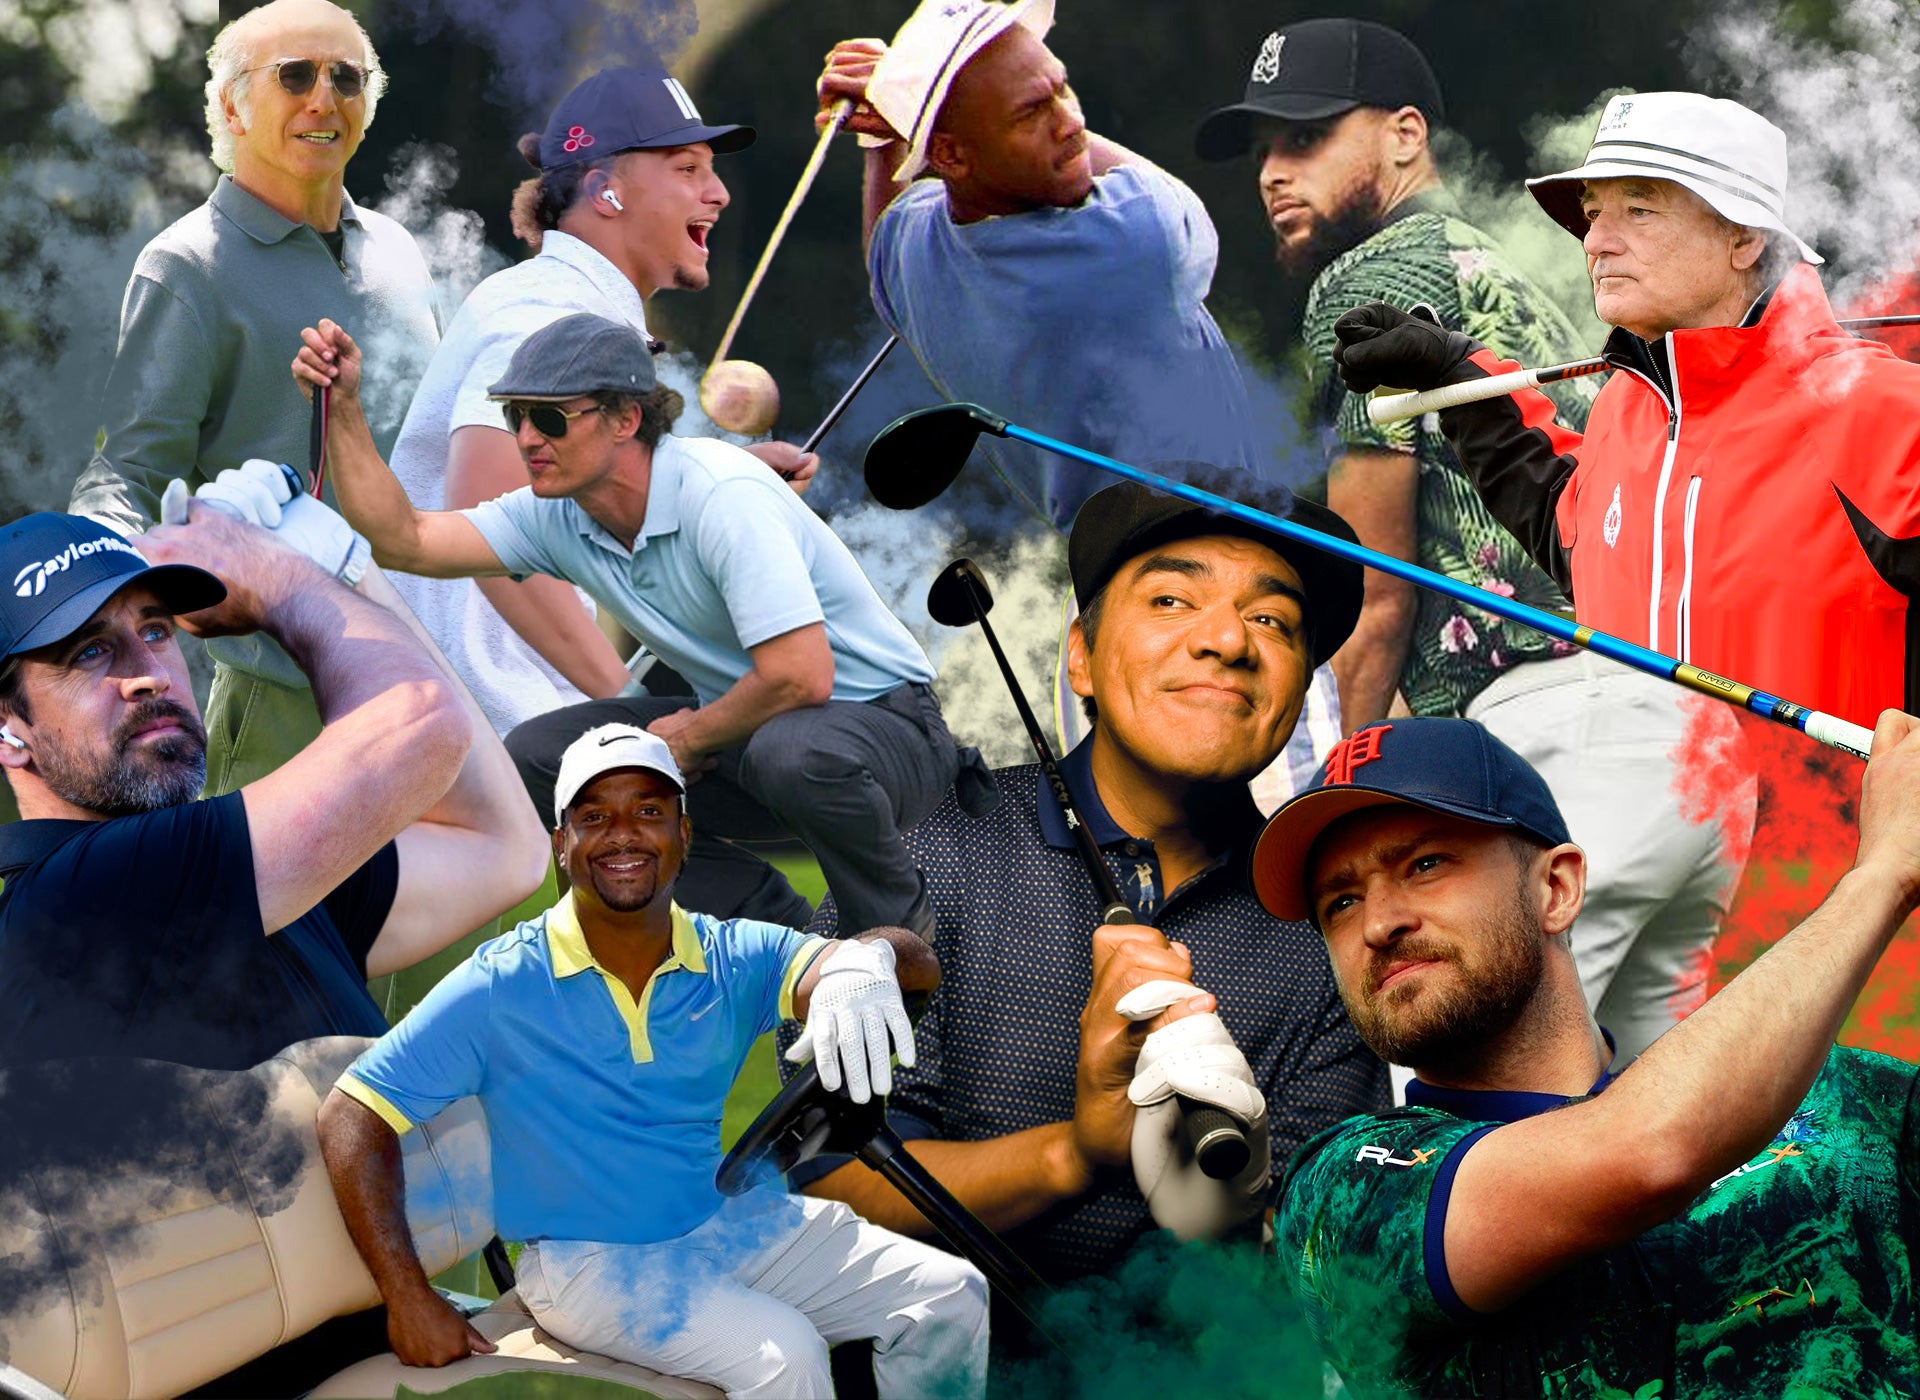 Our Favorite Celebrity Golfers